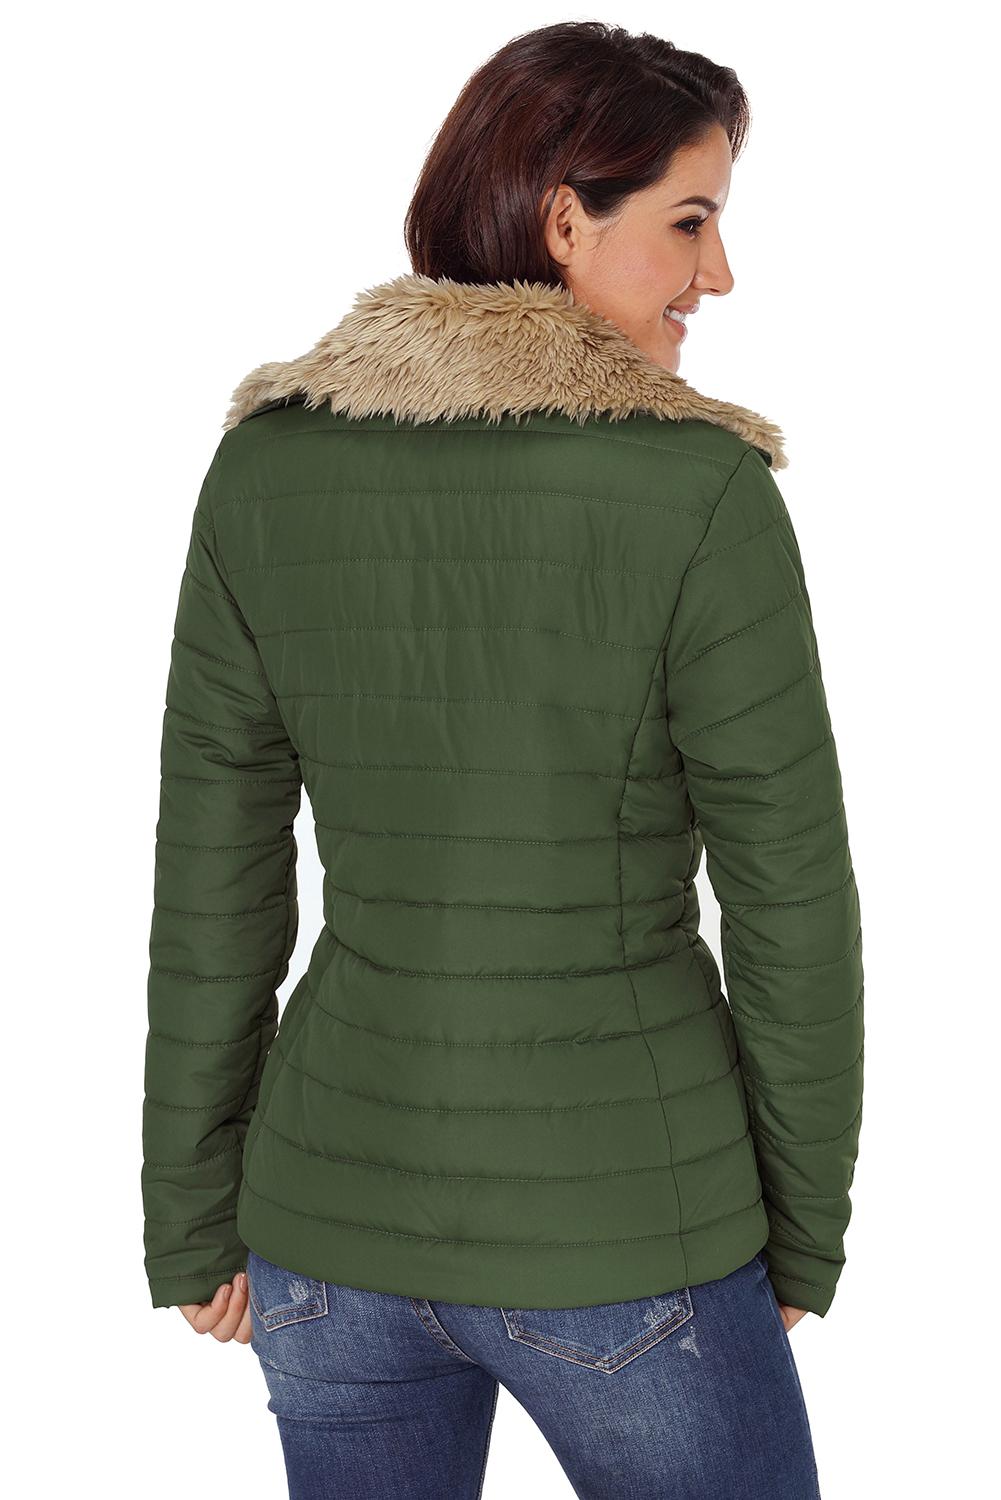 LC85117-9XXL, LC85117-9XL, LC85117-9L, LC85117-9M, LC85117-9S, Broute Green Winter Coats for Women Camel Faux Fur Collar Trim Black Quilted Jacket Outerwear